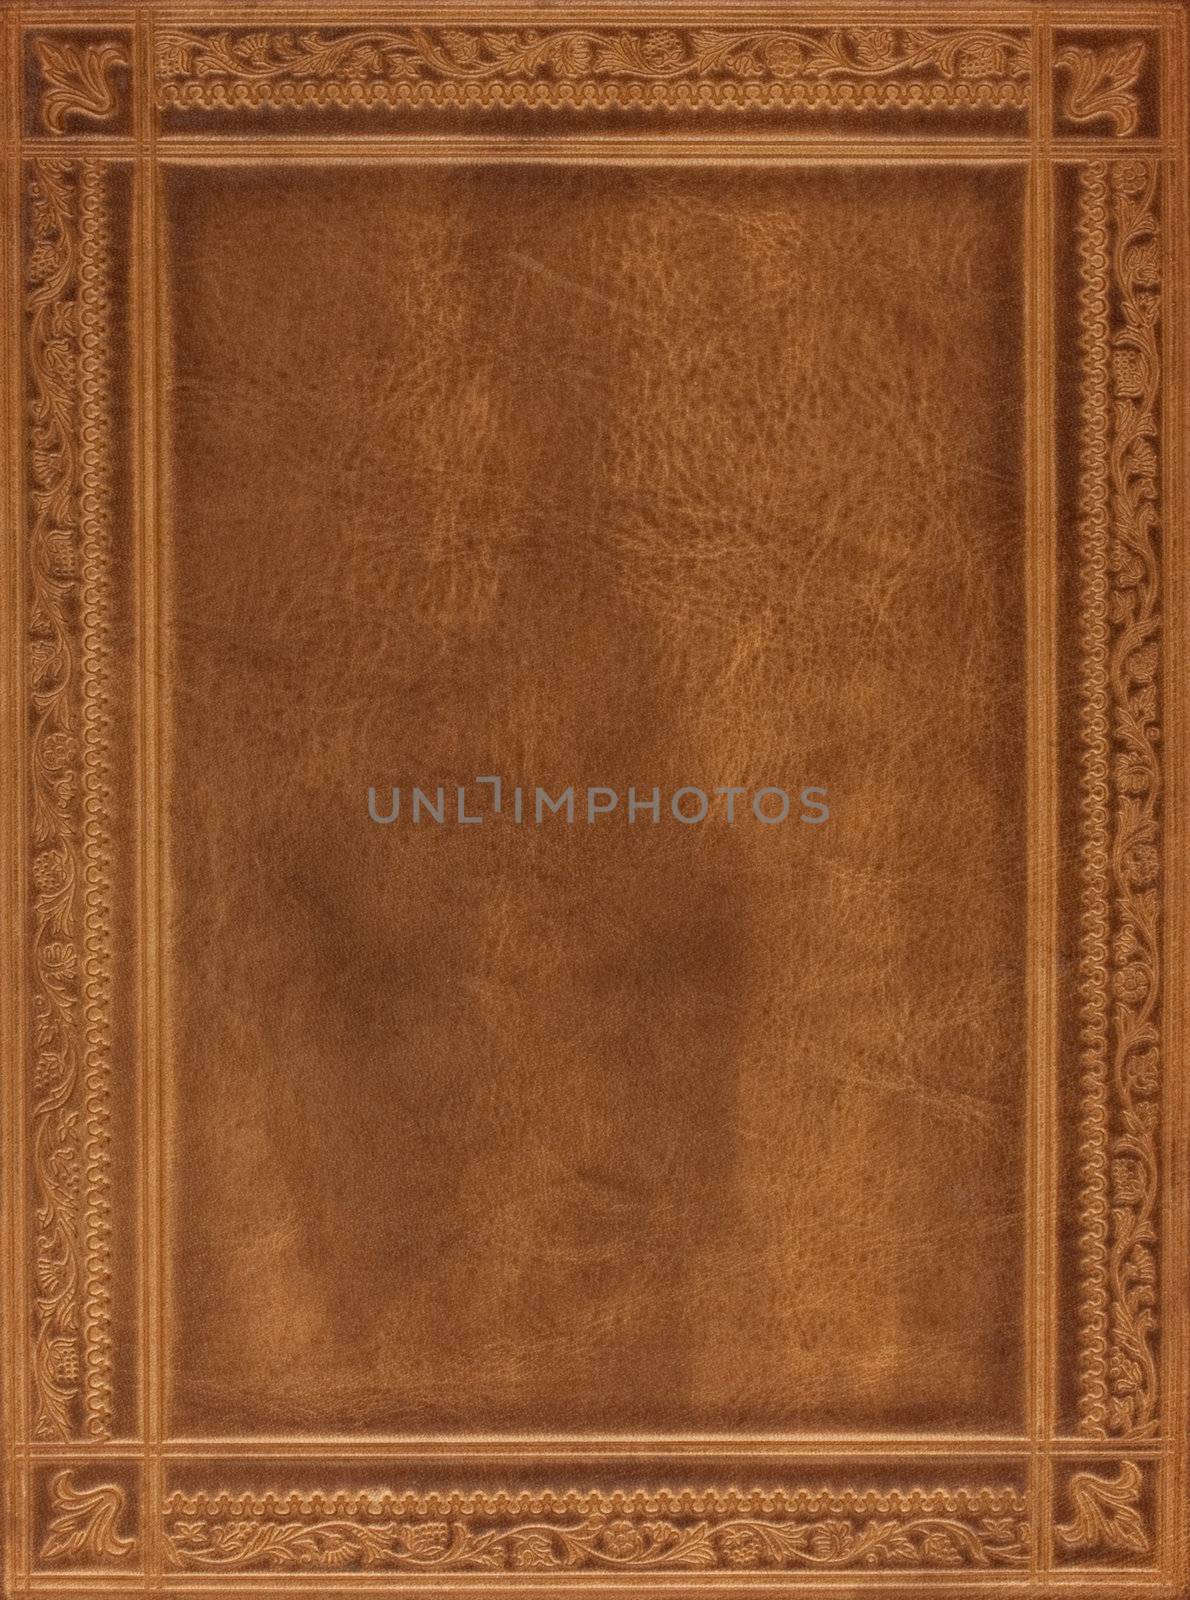 brown leather book cover by PixelsAway